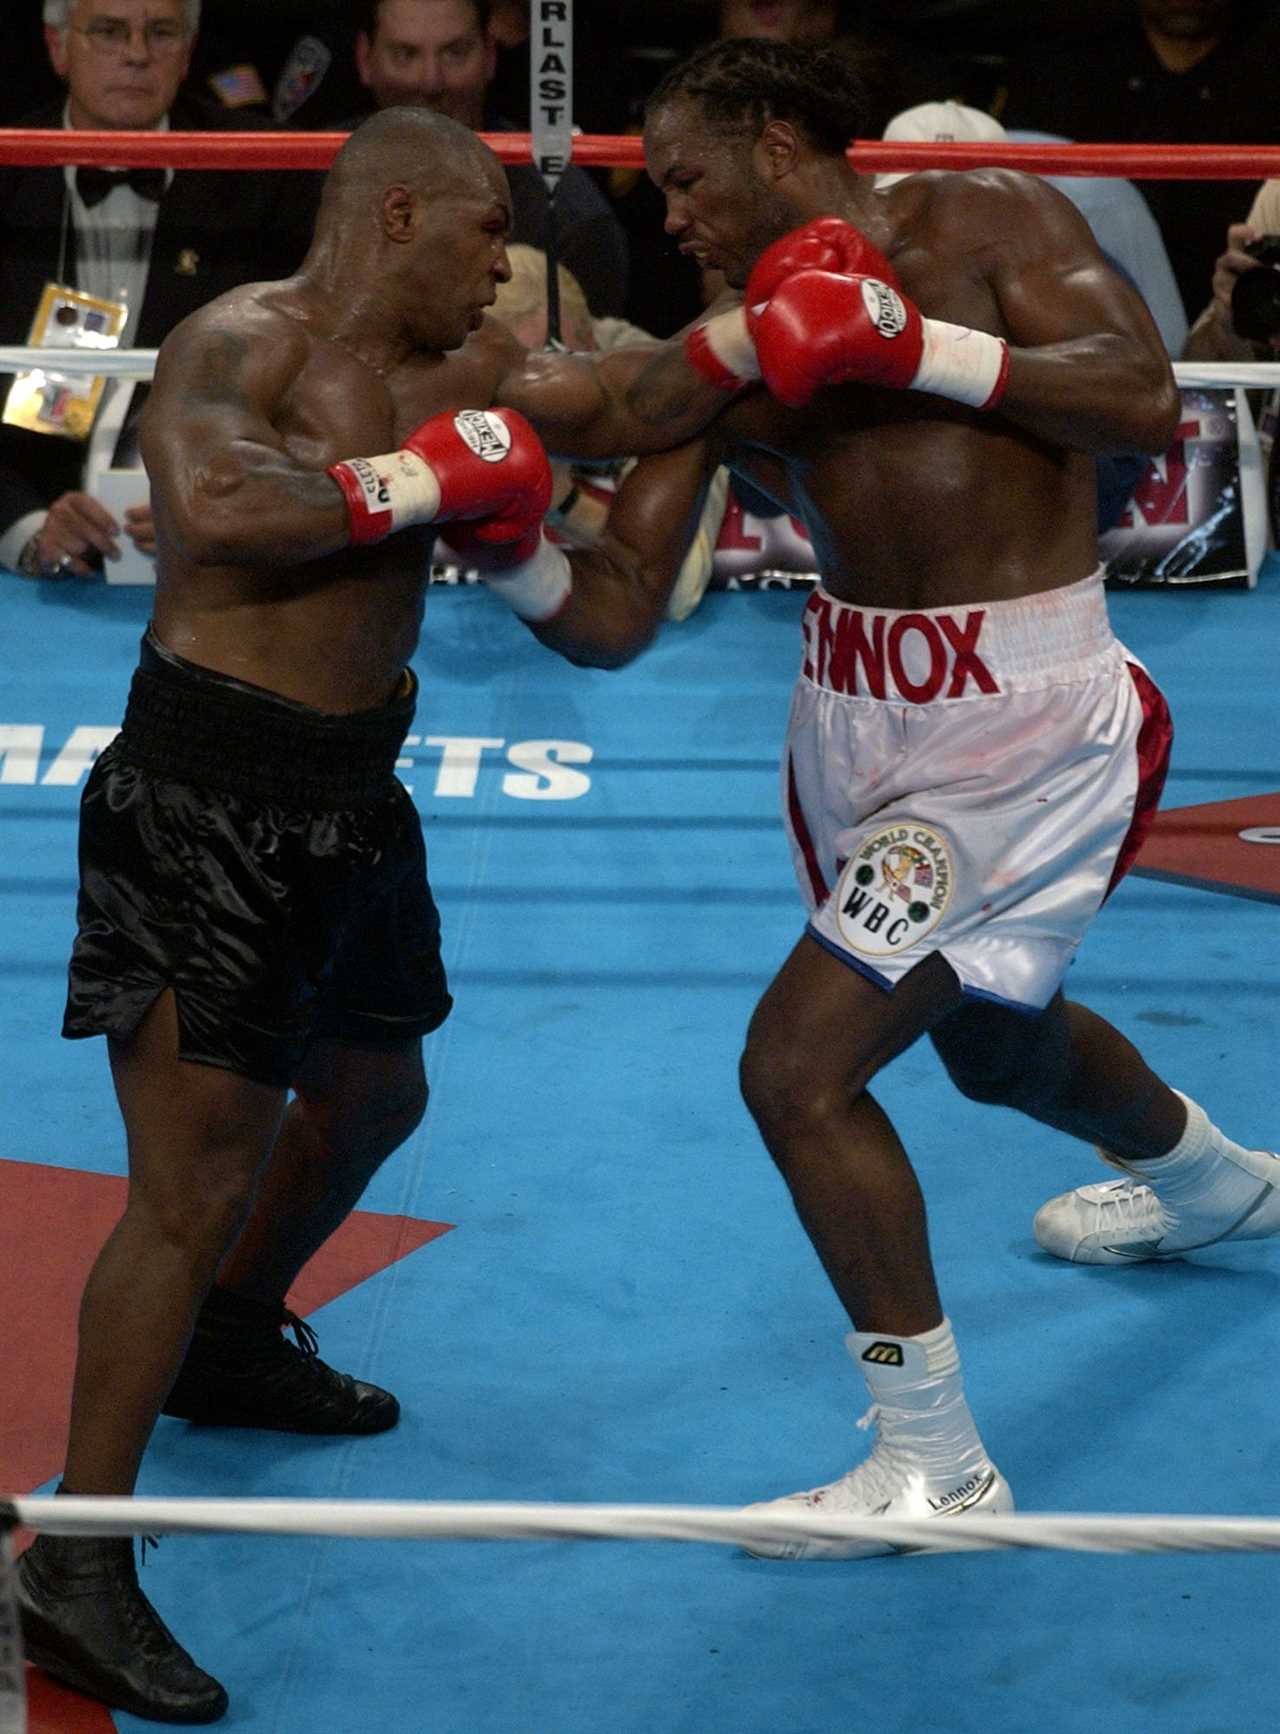 Mike Tyson announces that he will face Lennox Lewis, an old foe, in September.